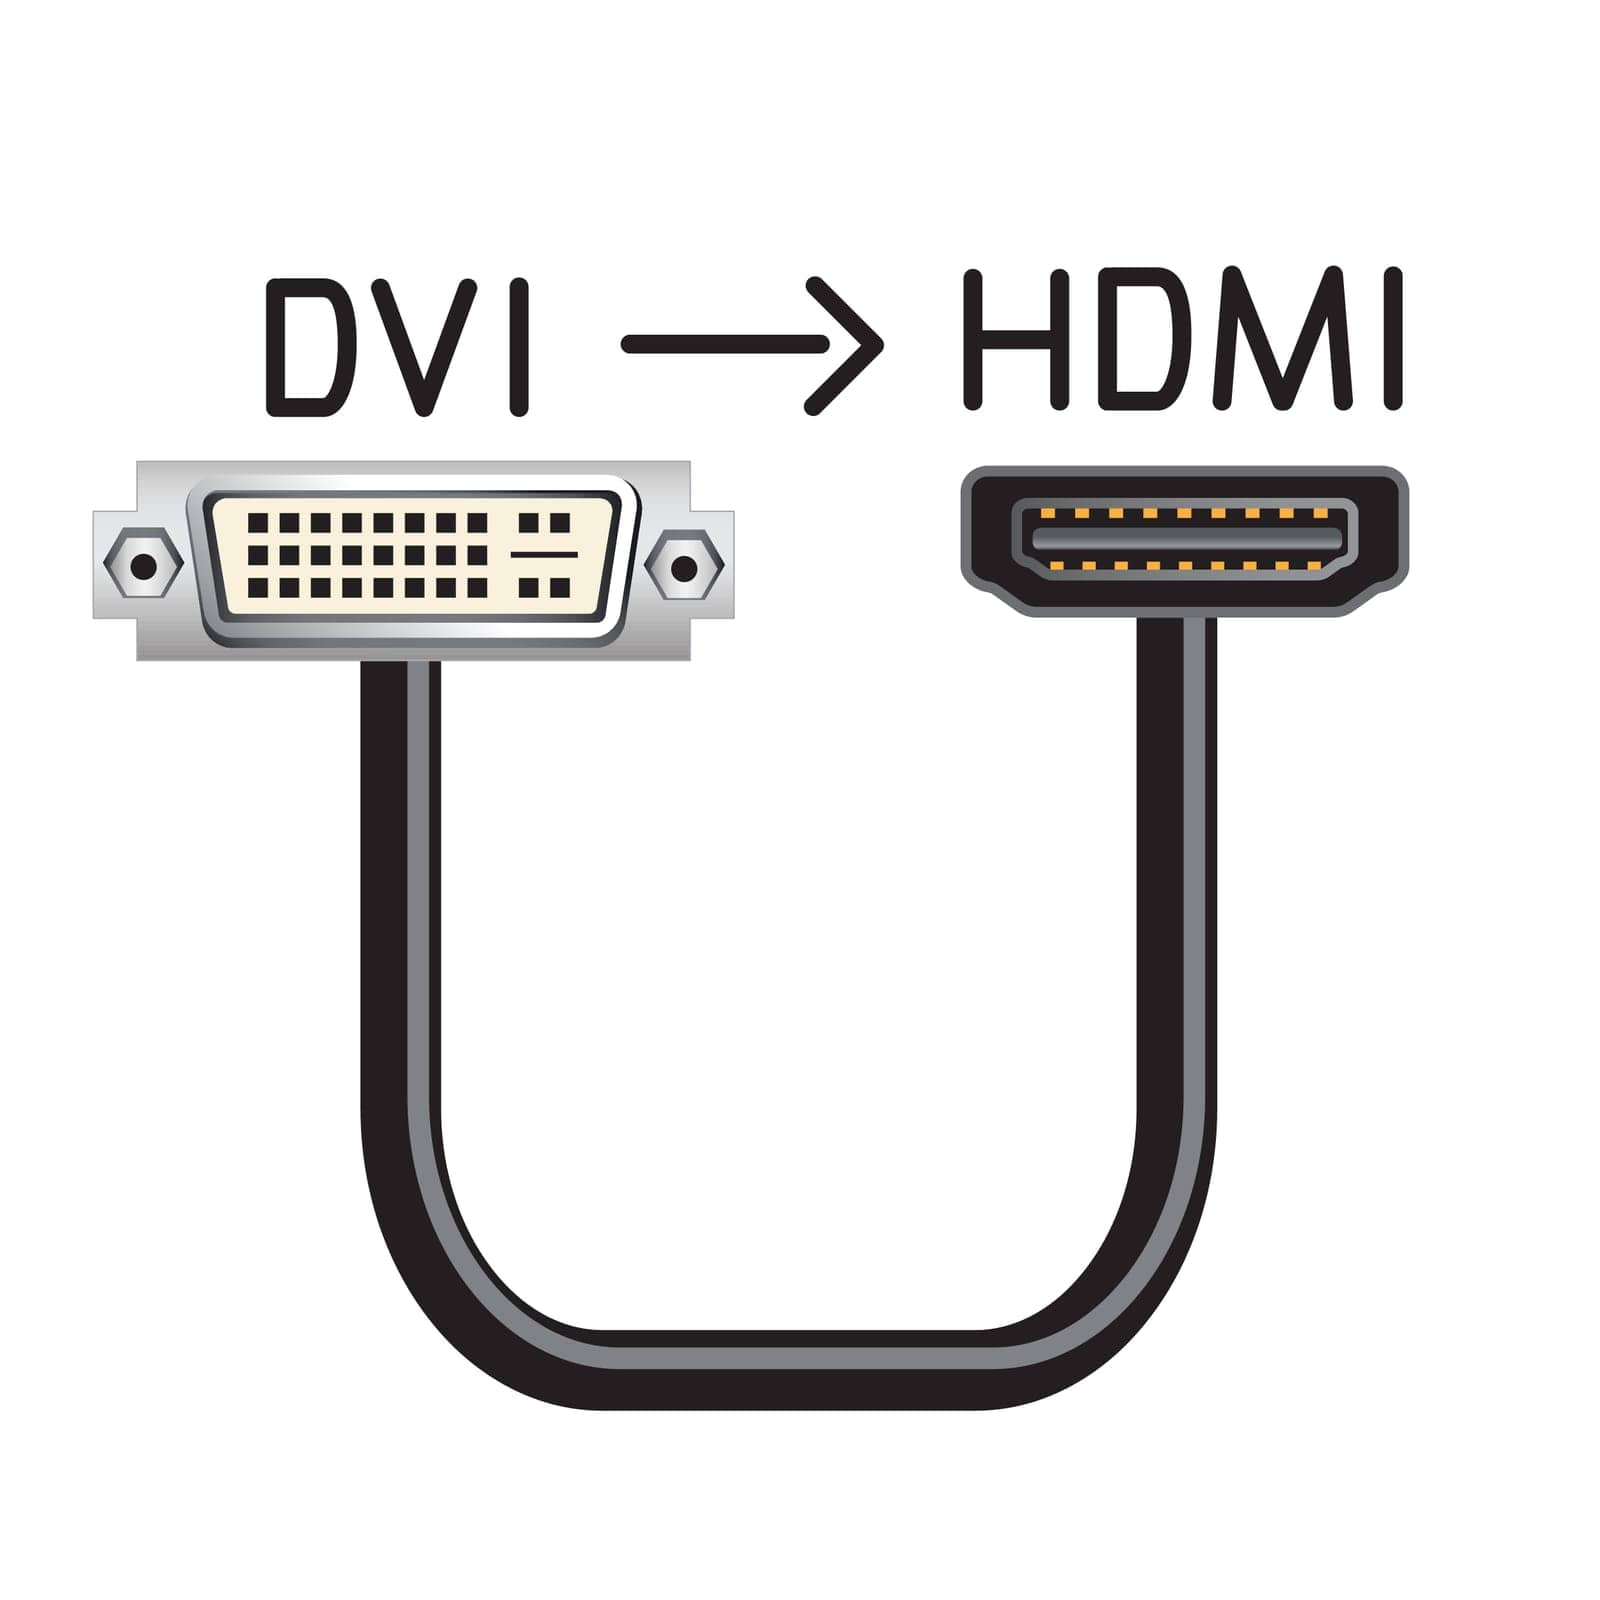 DVI to HDMI hardware interface cable by romvo